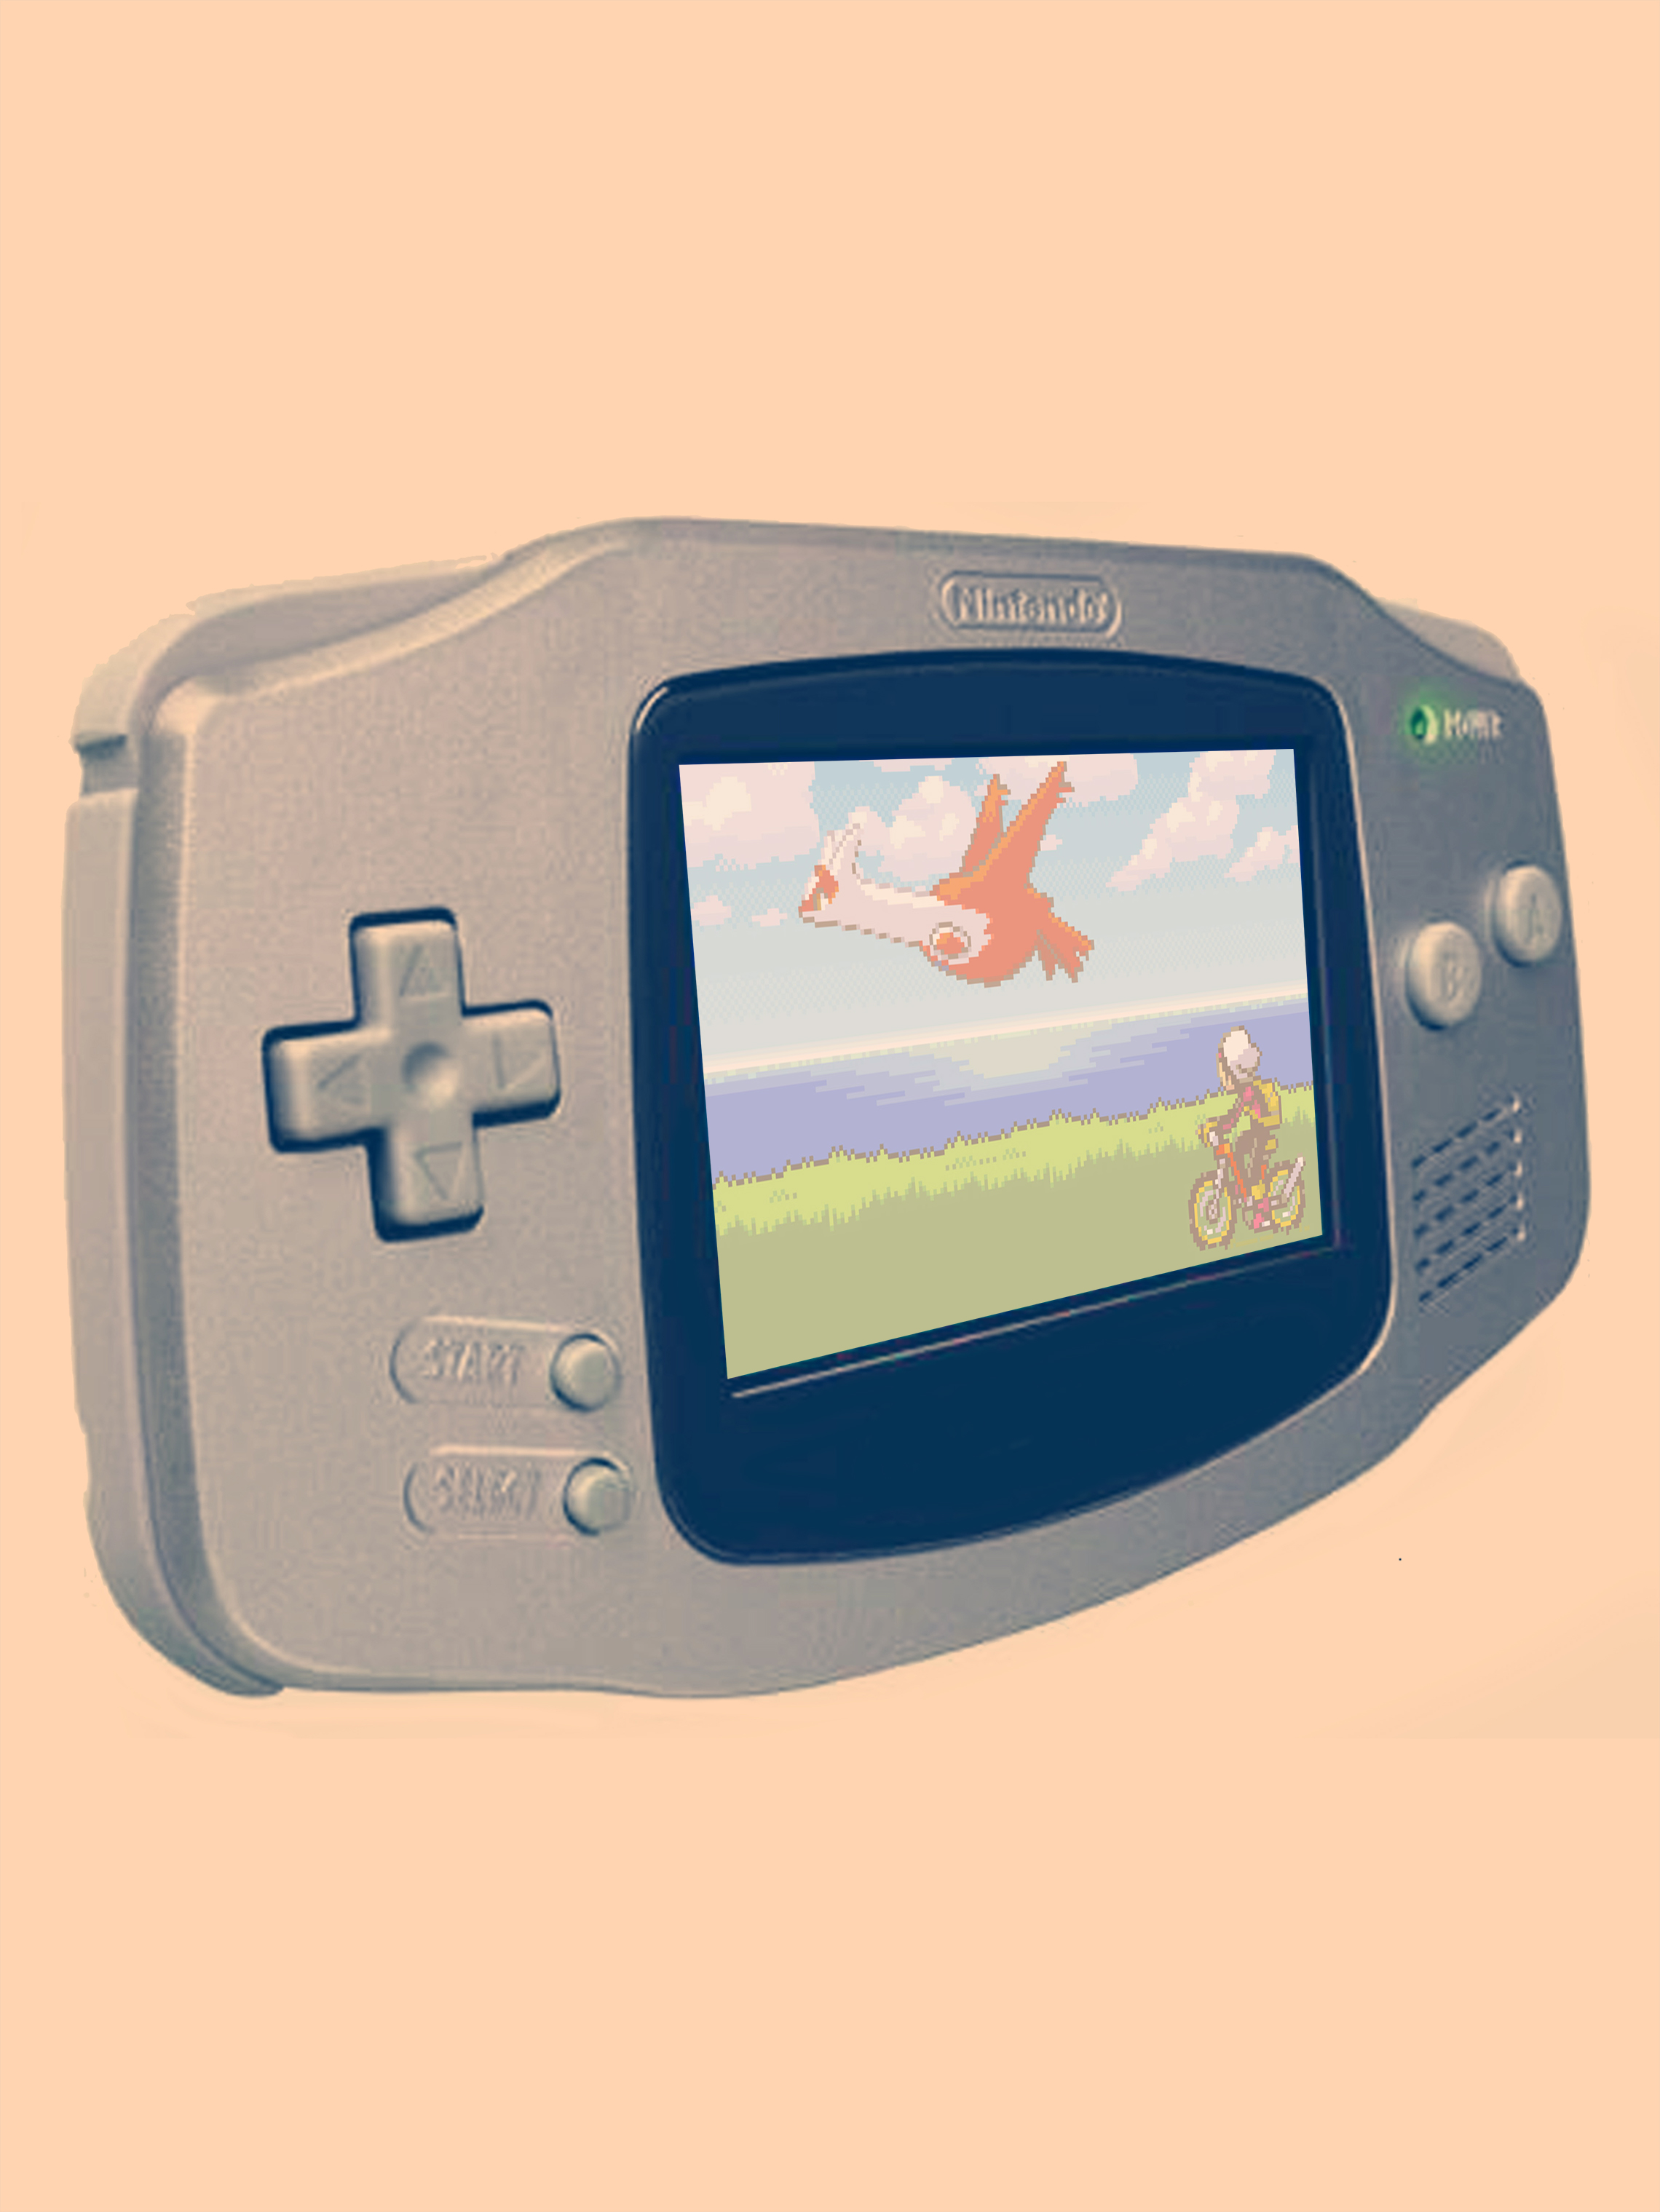 How the Game Boy Advance Truly Advanced Handheld Gaming